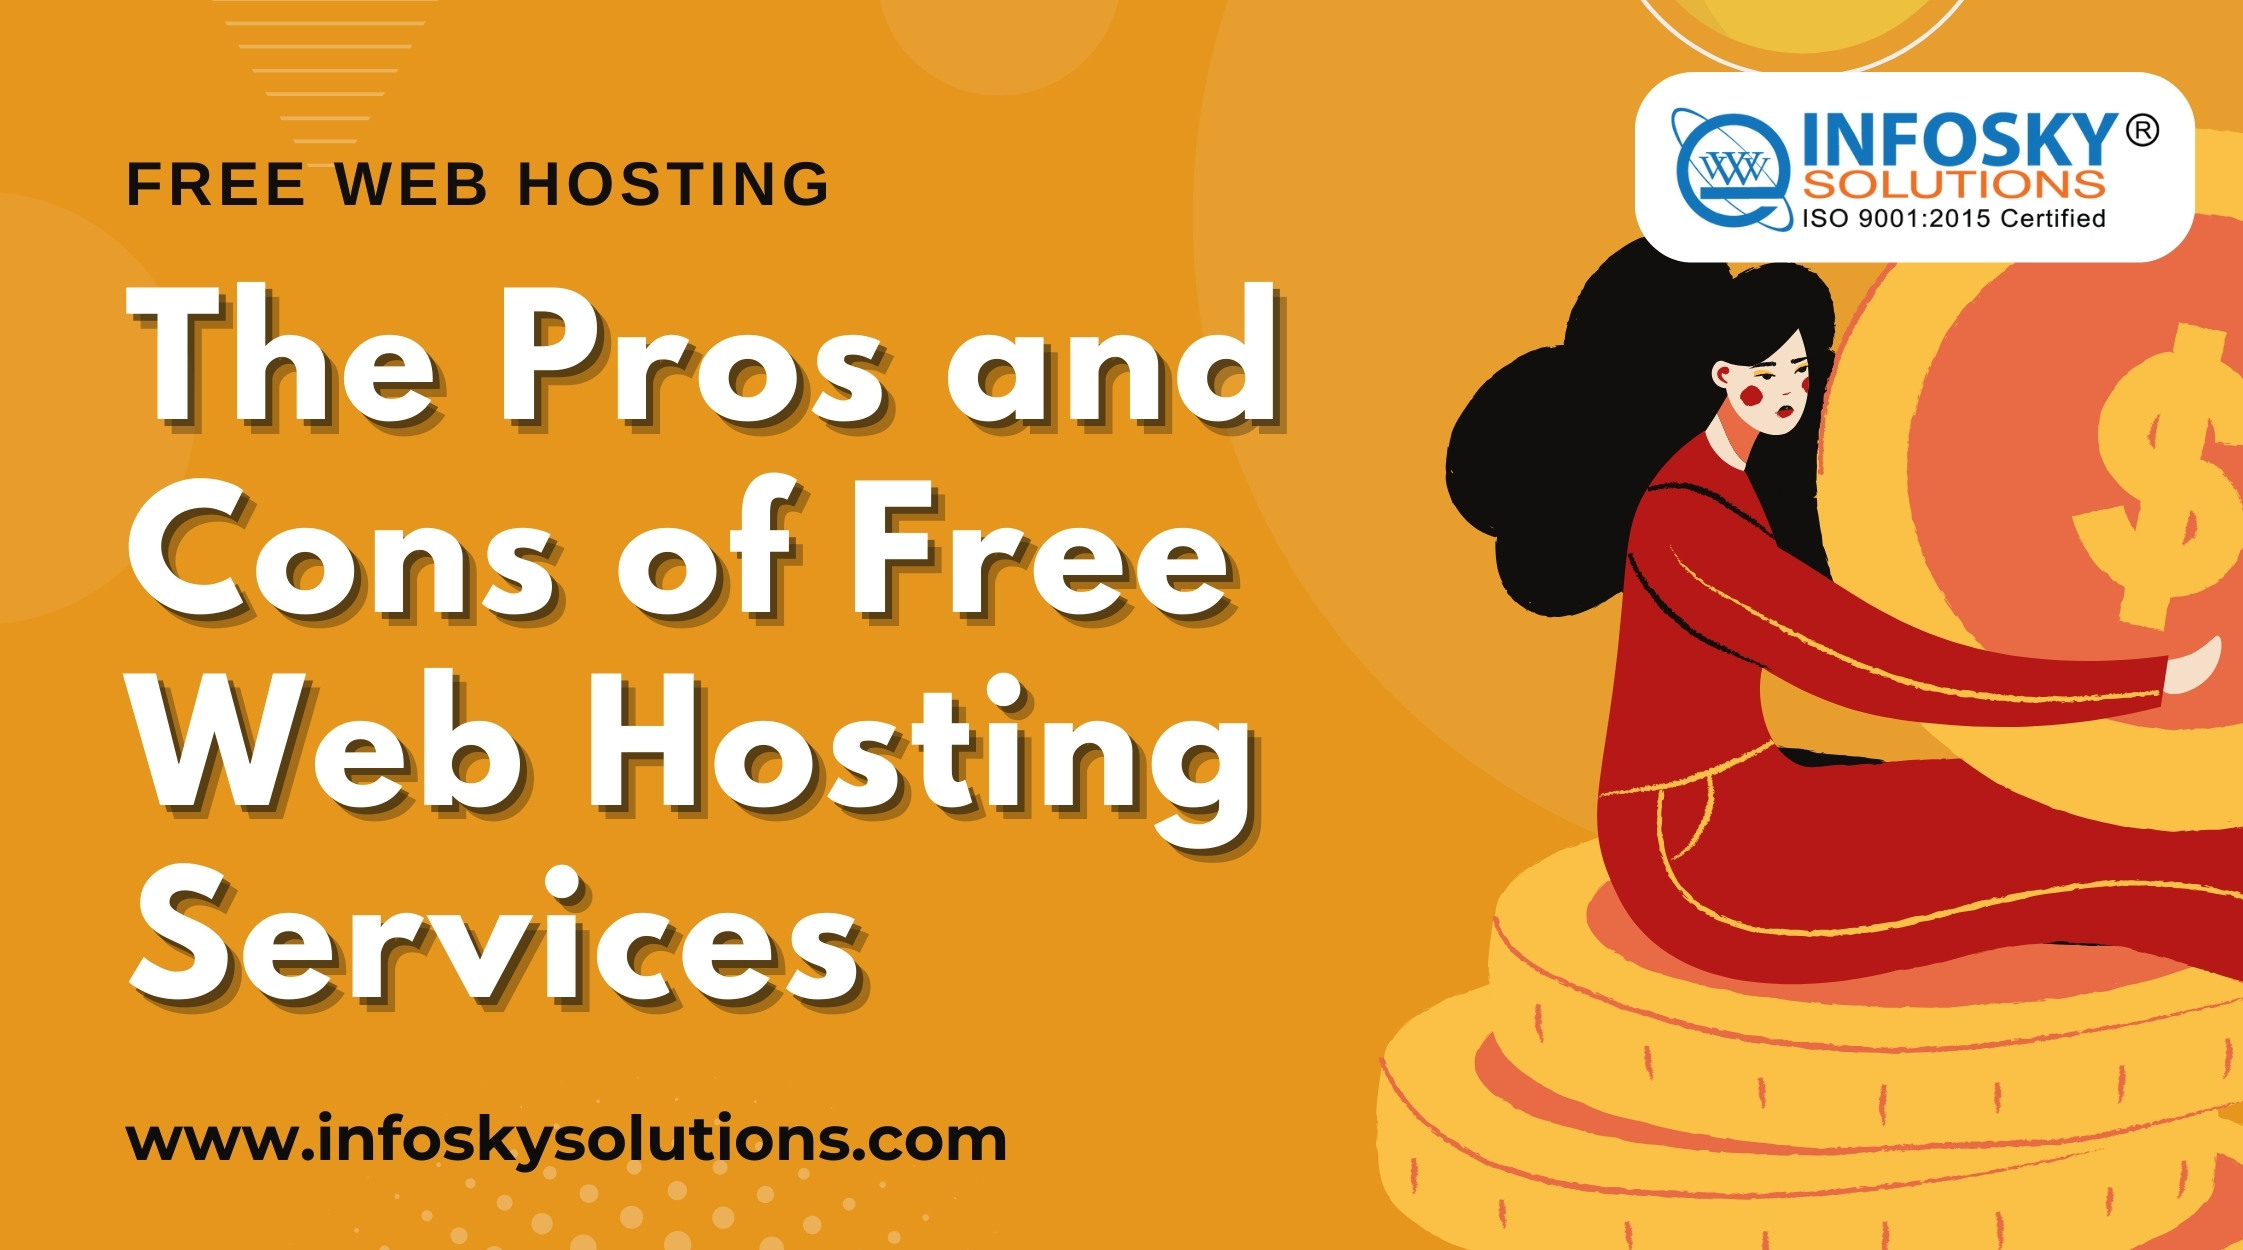 The Pros and Cons of Free Web Hosting Services - Infosky Solutions Blog